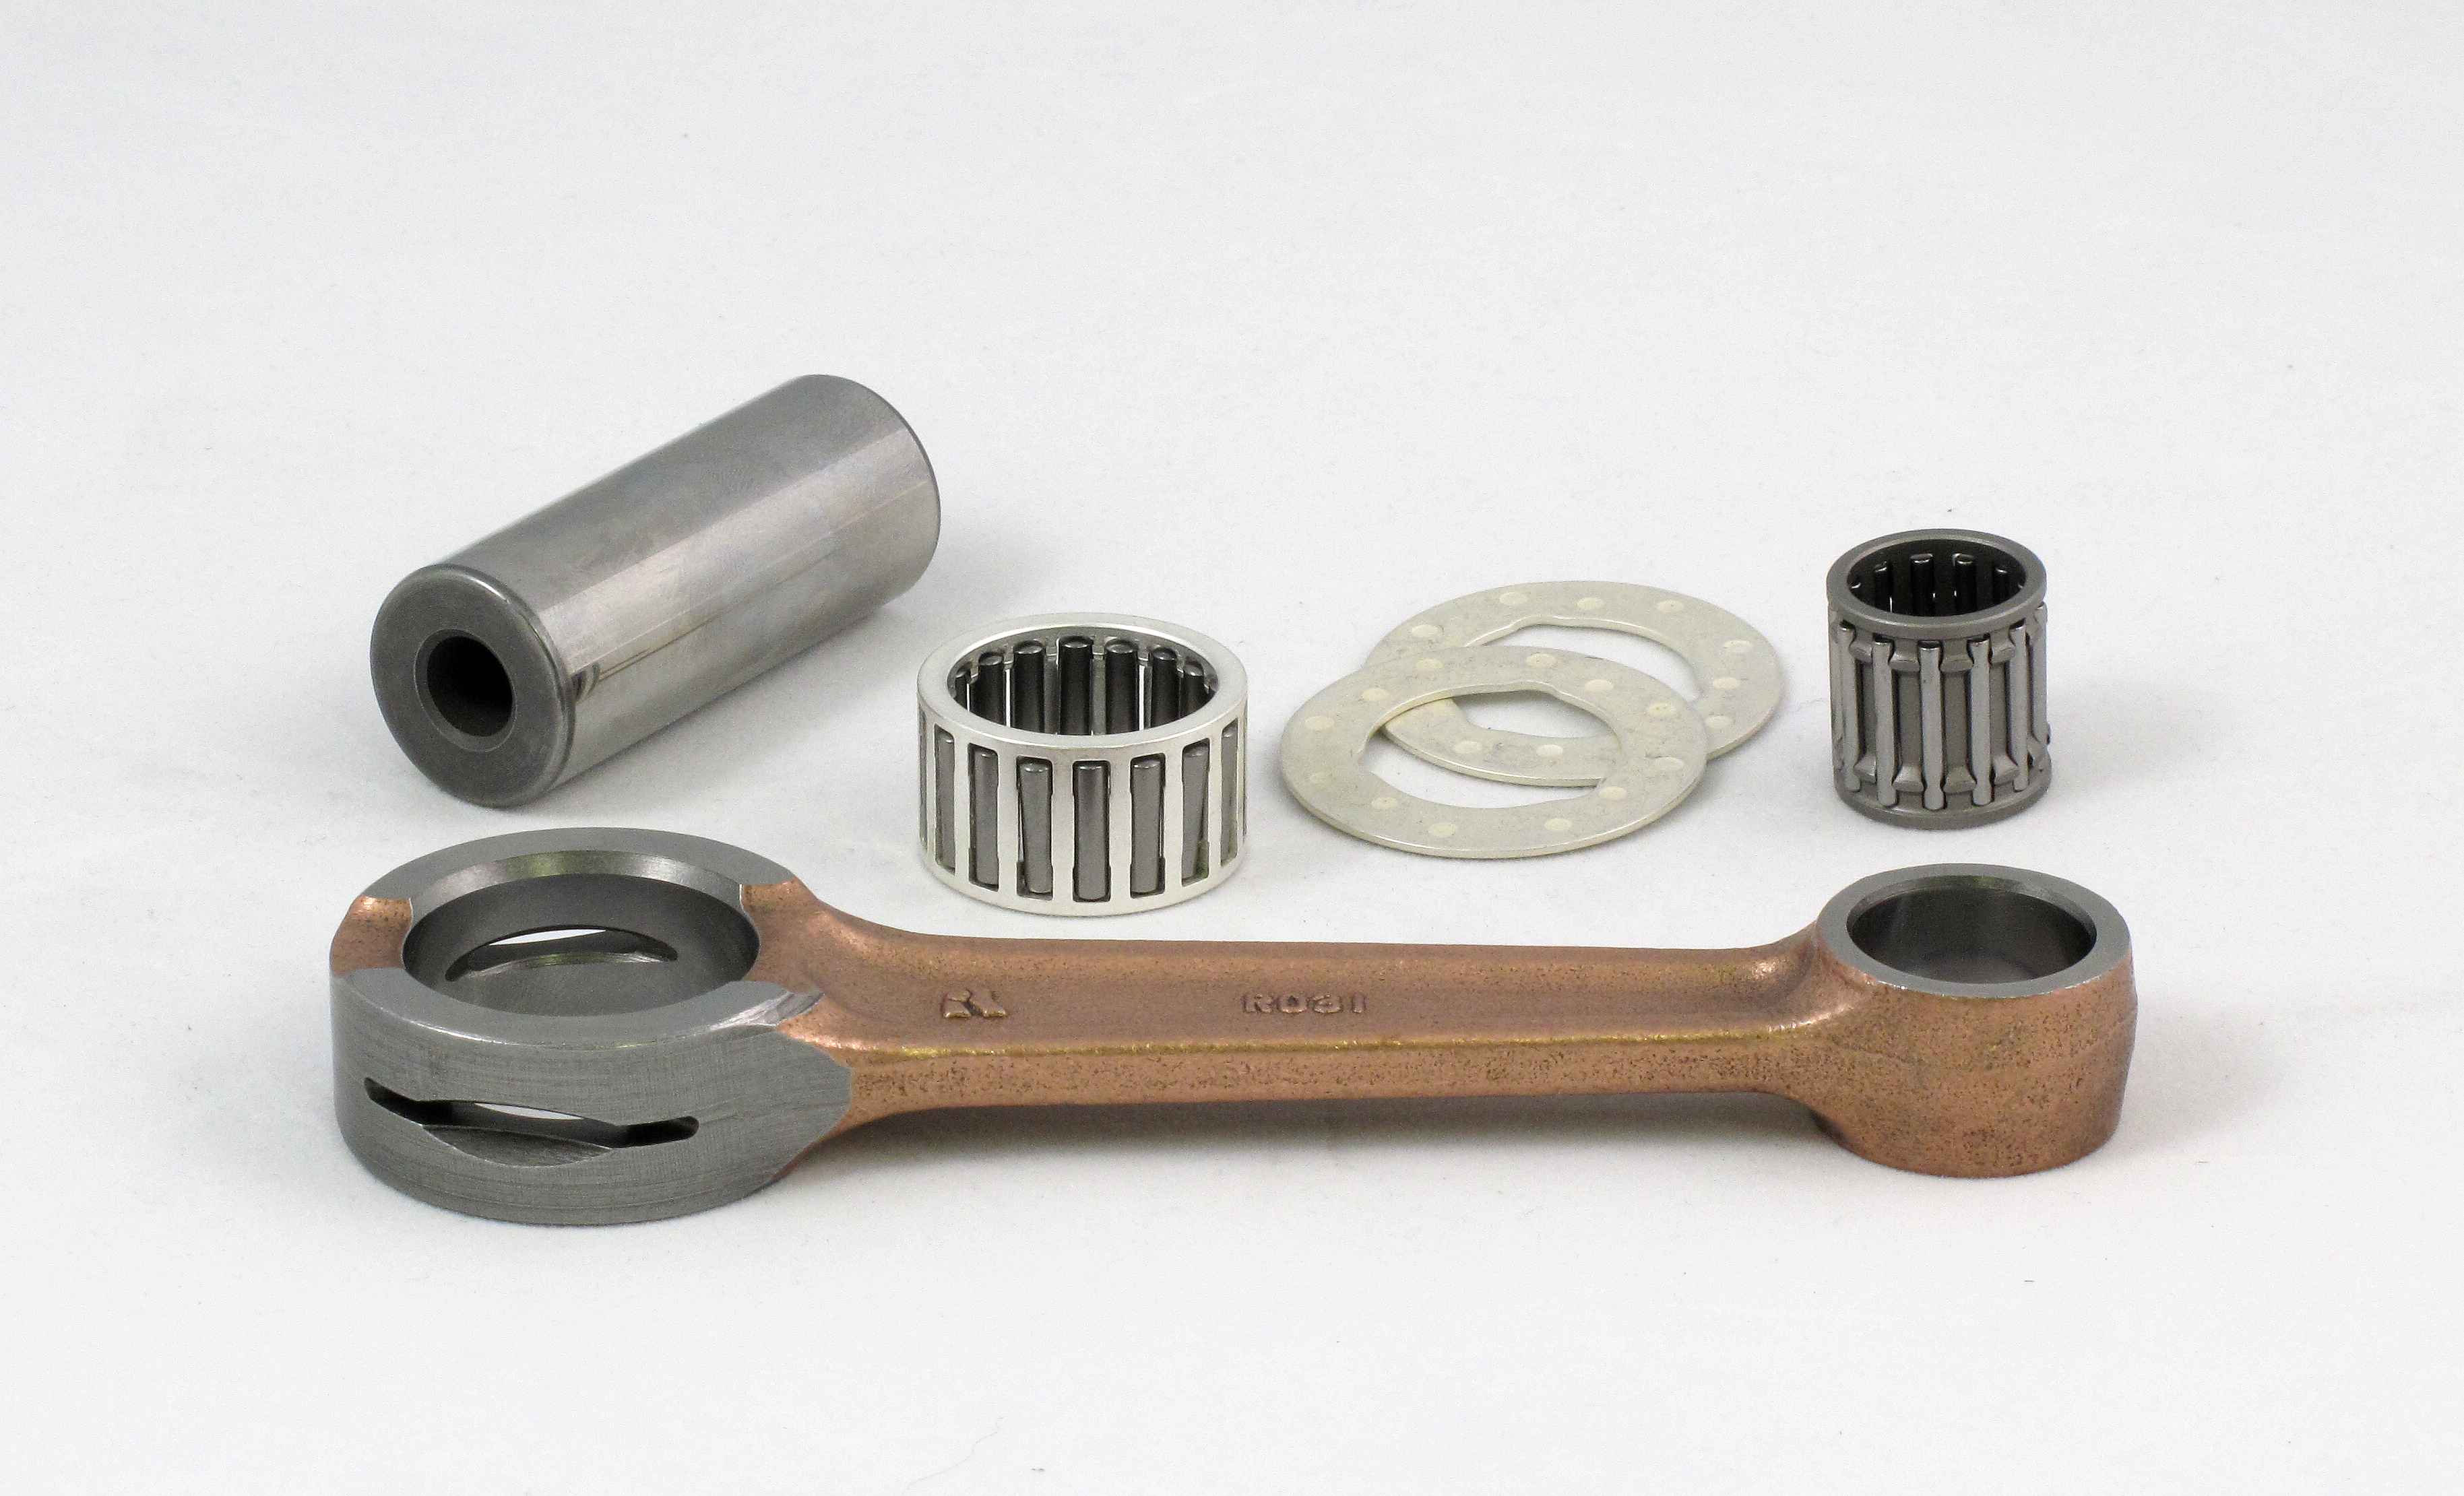 MAICO 490 (LATE MODELS) CONNECTING ROD KIT 